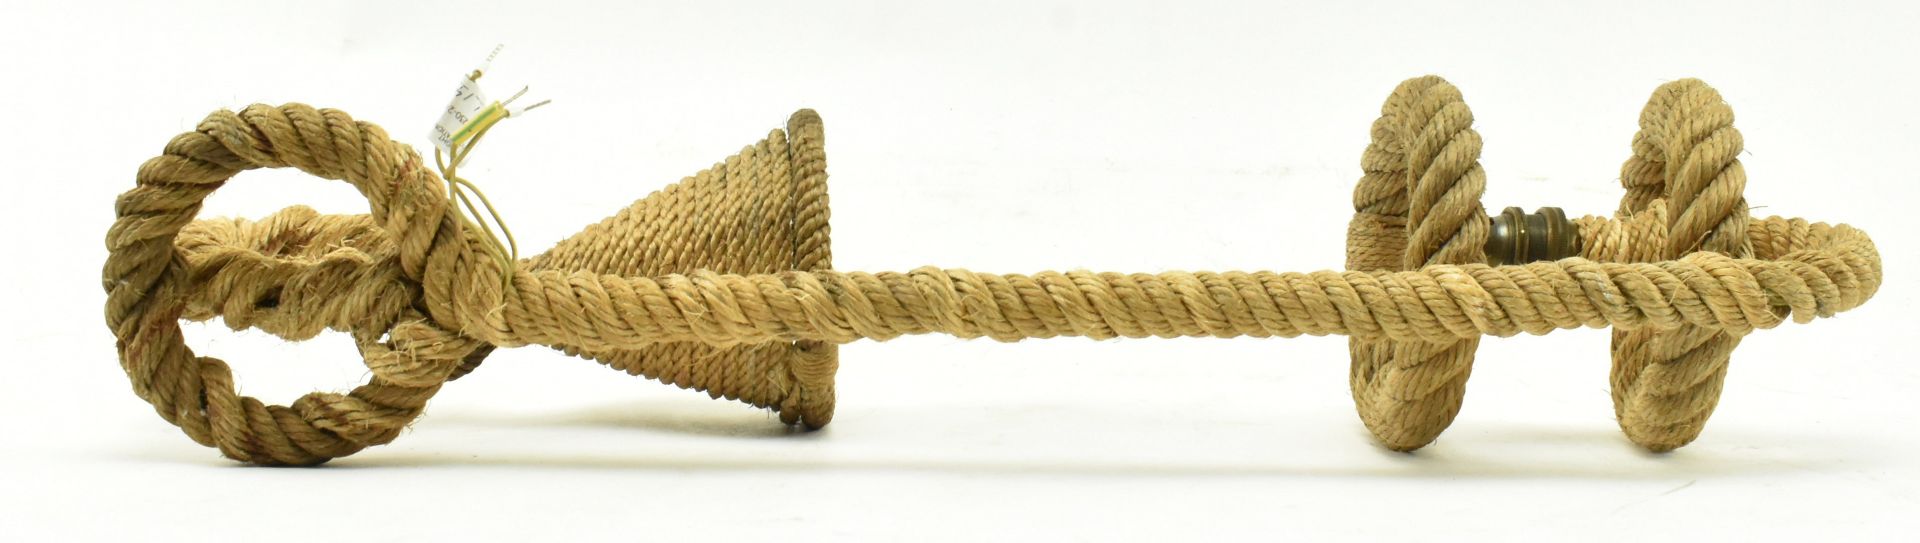 ATTRIBUTED TO AUDOUX & MINE - VINTAGE ROPE WALL SCONCE - Image 4 of 5